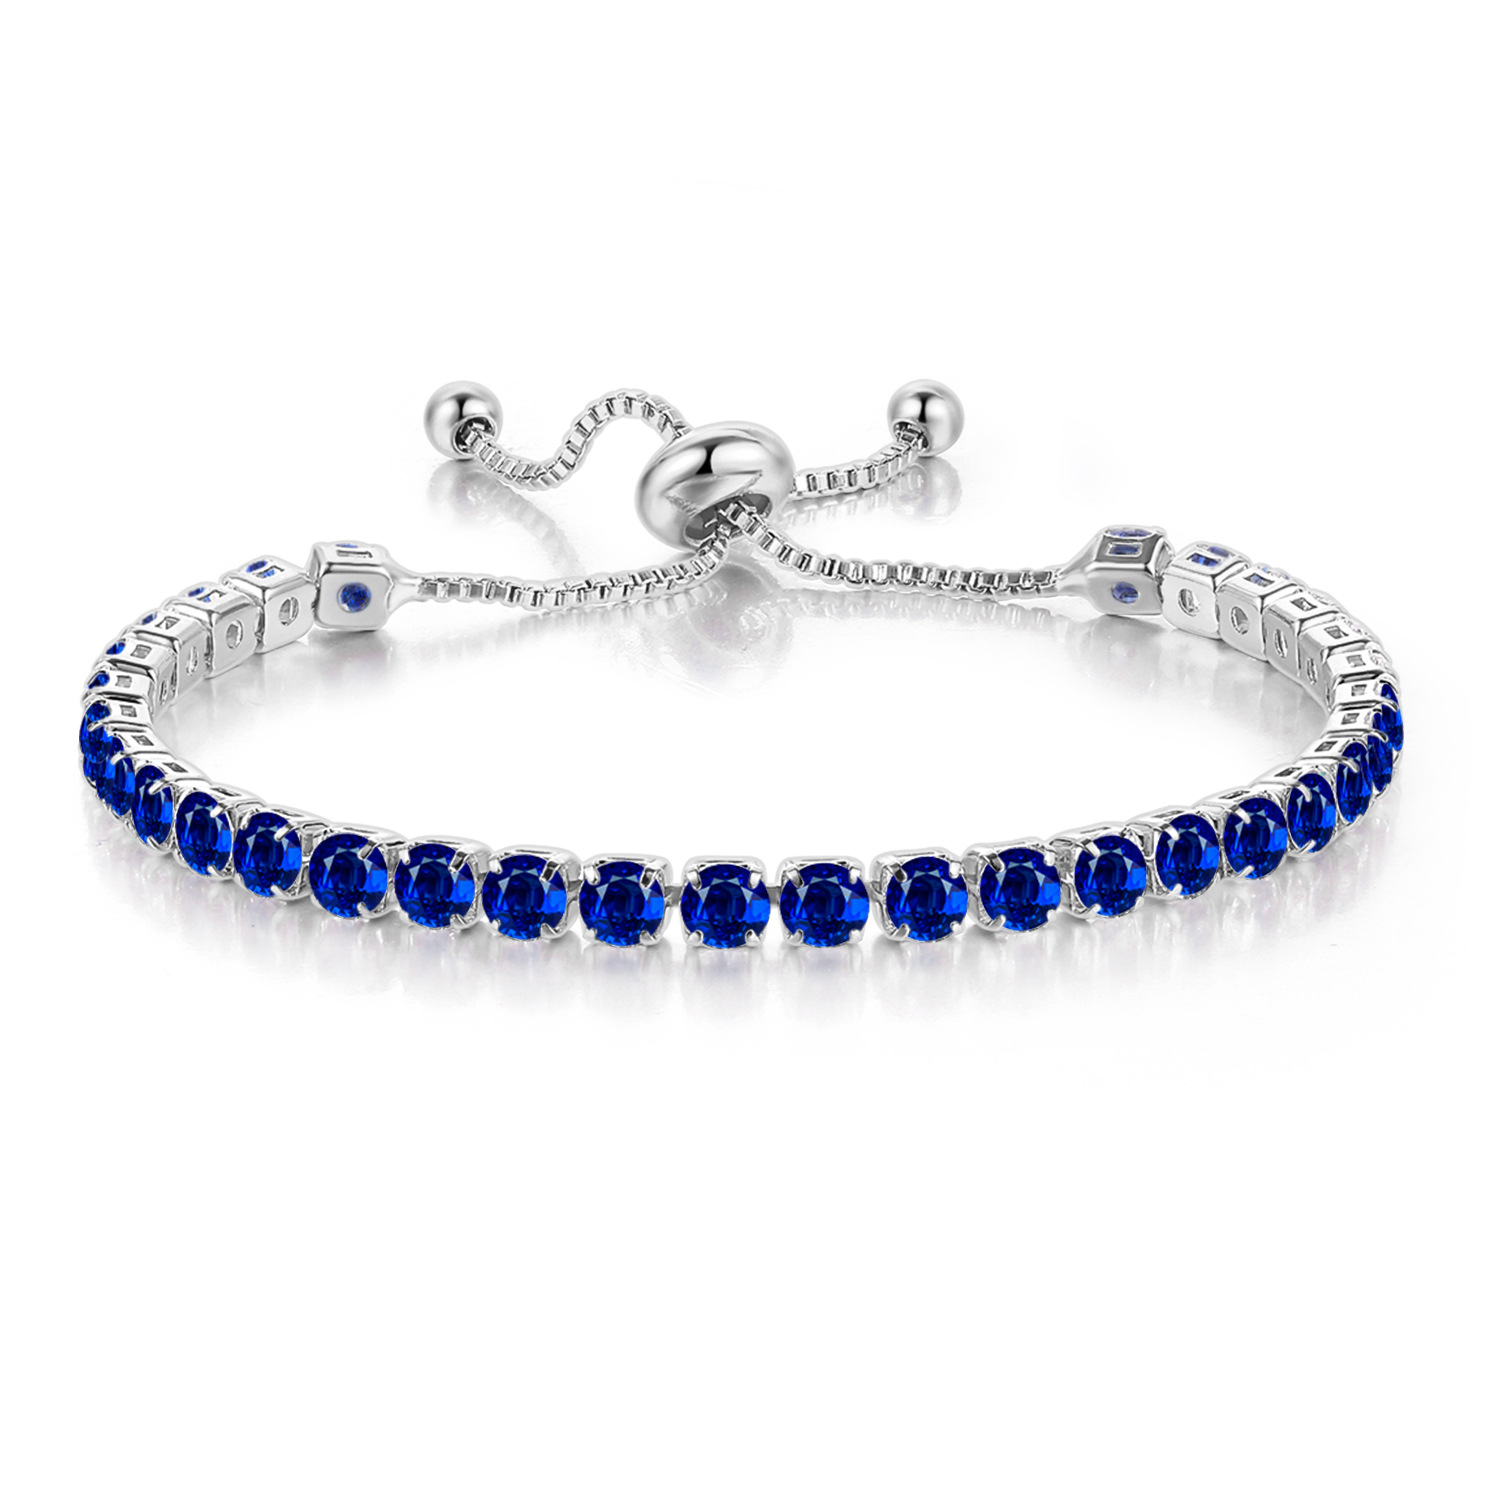 BJ Jewelry 18k White Gold 6 Cttw Created Blue Sapphire Round Adjustable Tennis Plated Bracelet